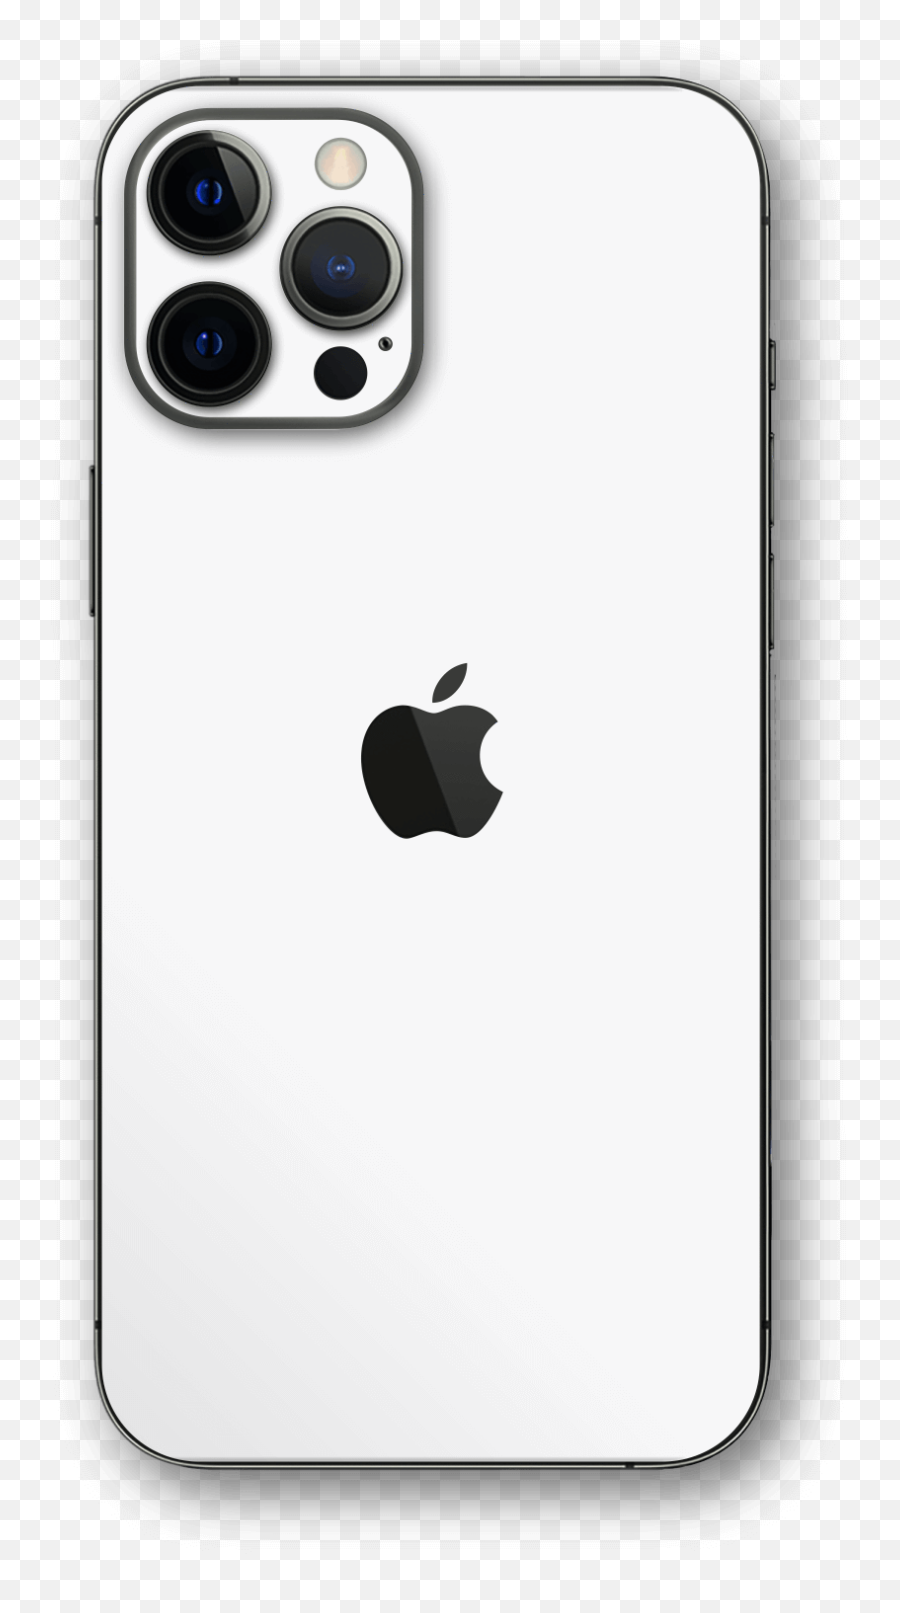 Iphone 12 Png - Iphone 12 Pro Max Png Download Emoji,Iphone Transparent Background